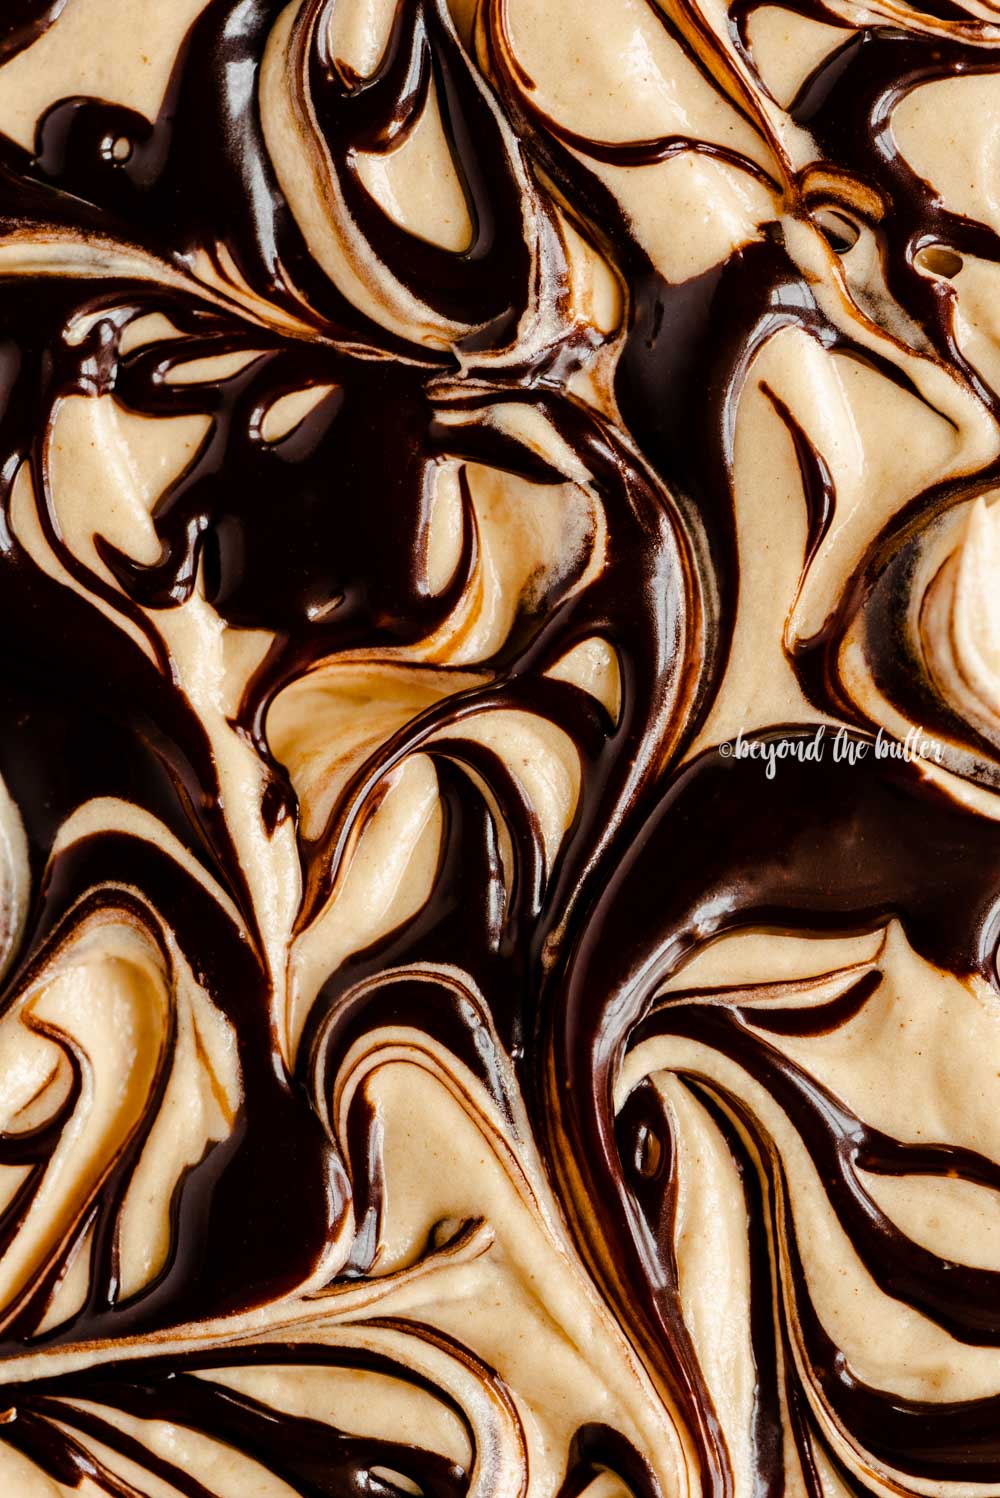 Closeup overhead image of chocolate peanut butter swirls | All Images © Beyond the Butter™